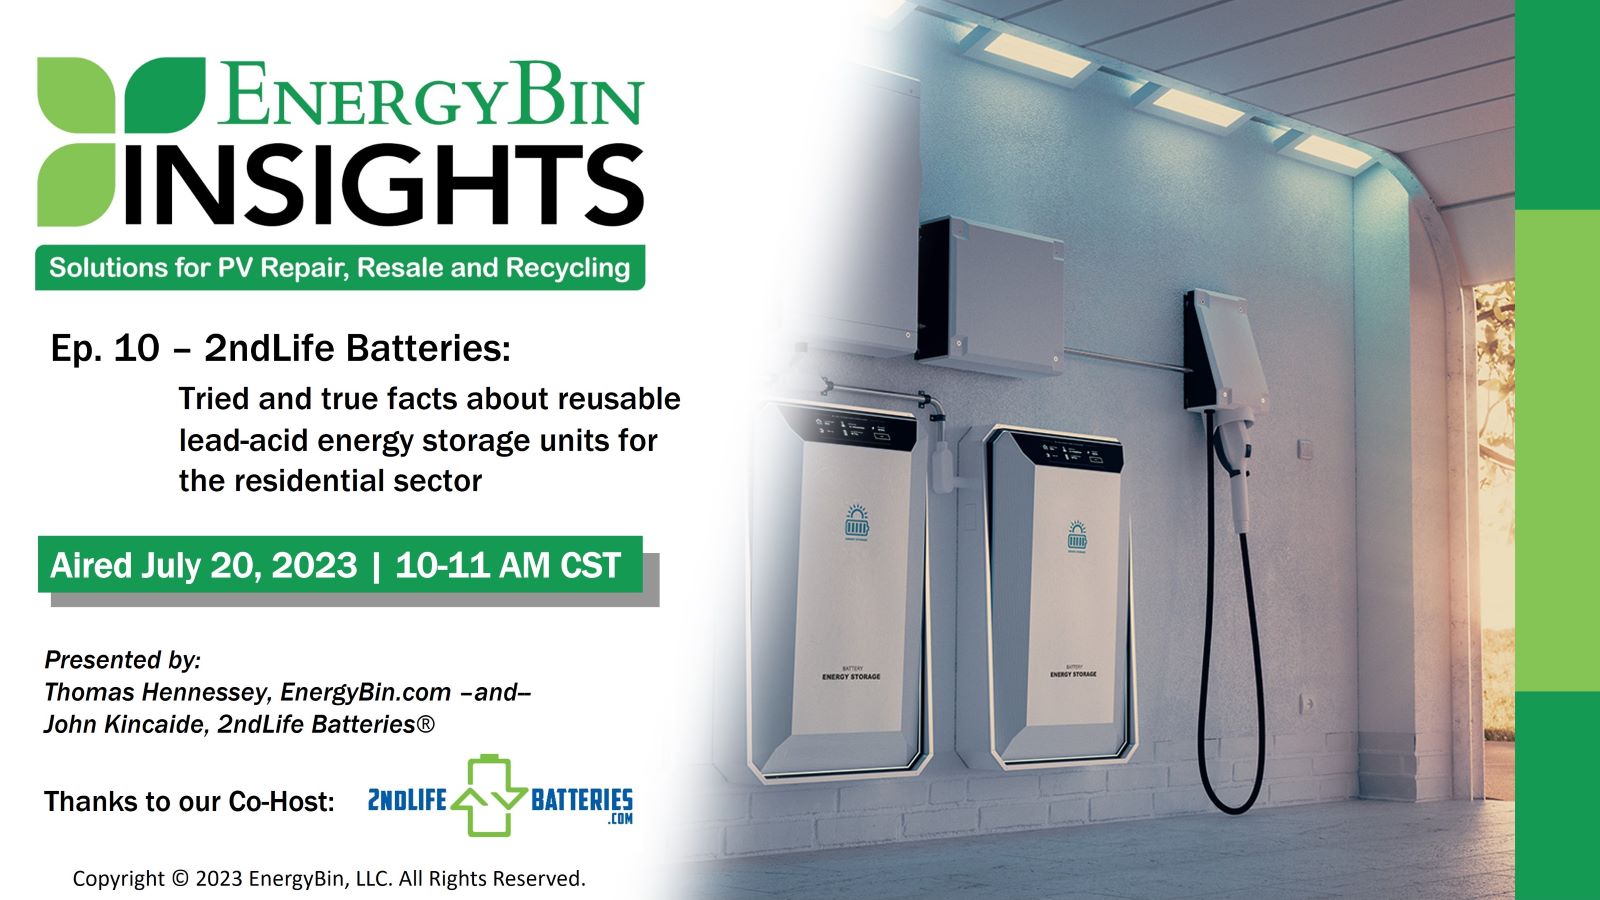 EB Insights Ep 10_2ndLife Batteries - Facts about reusable lead-acid energy storage units for the residential sector